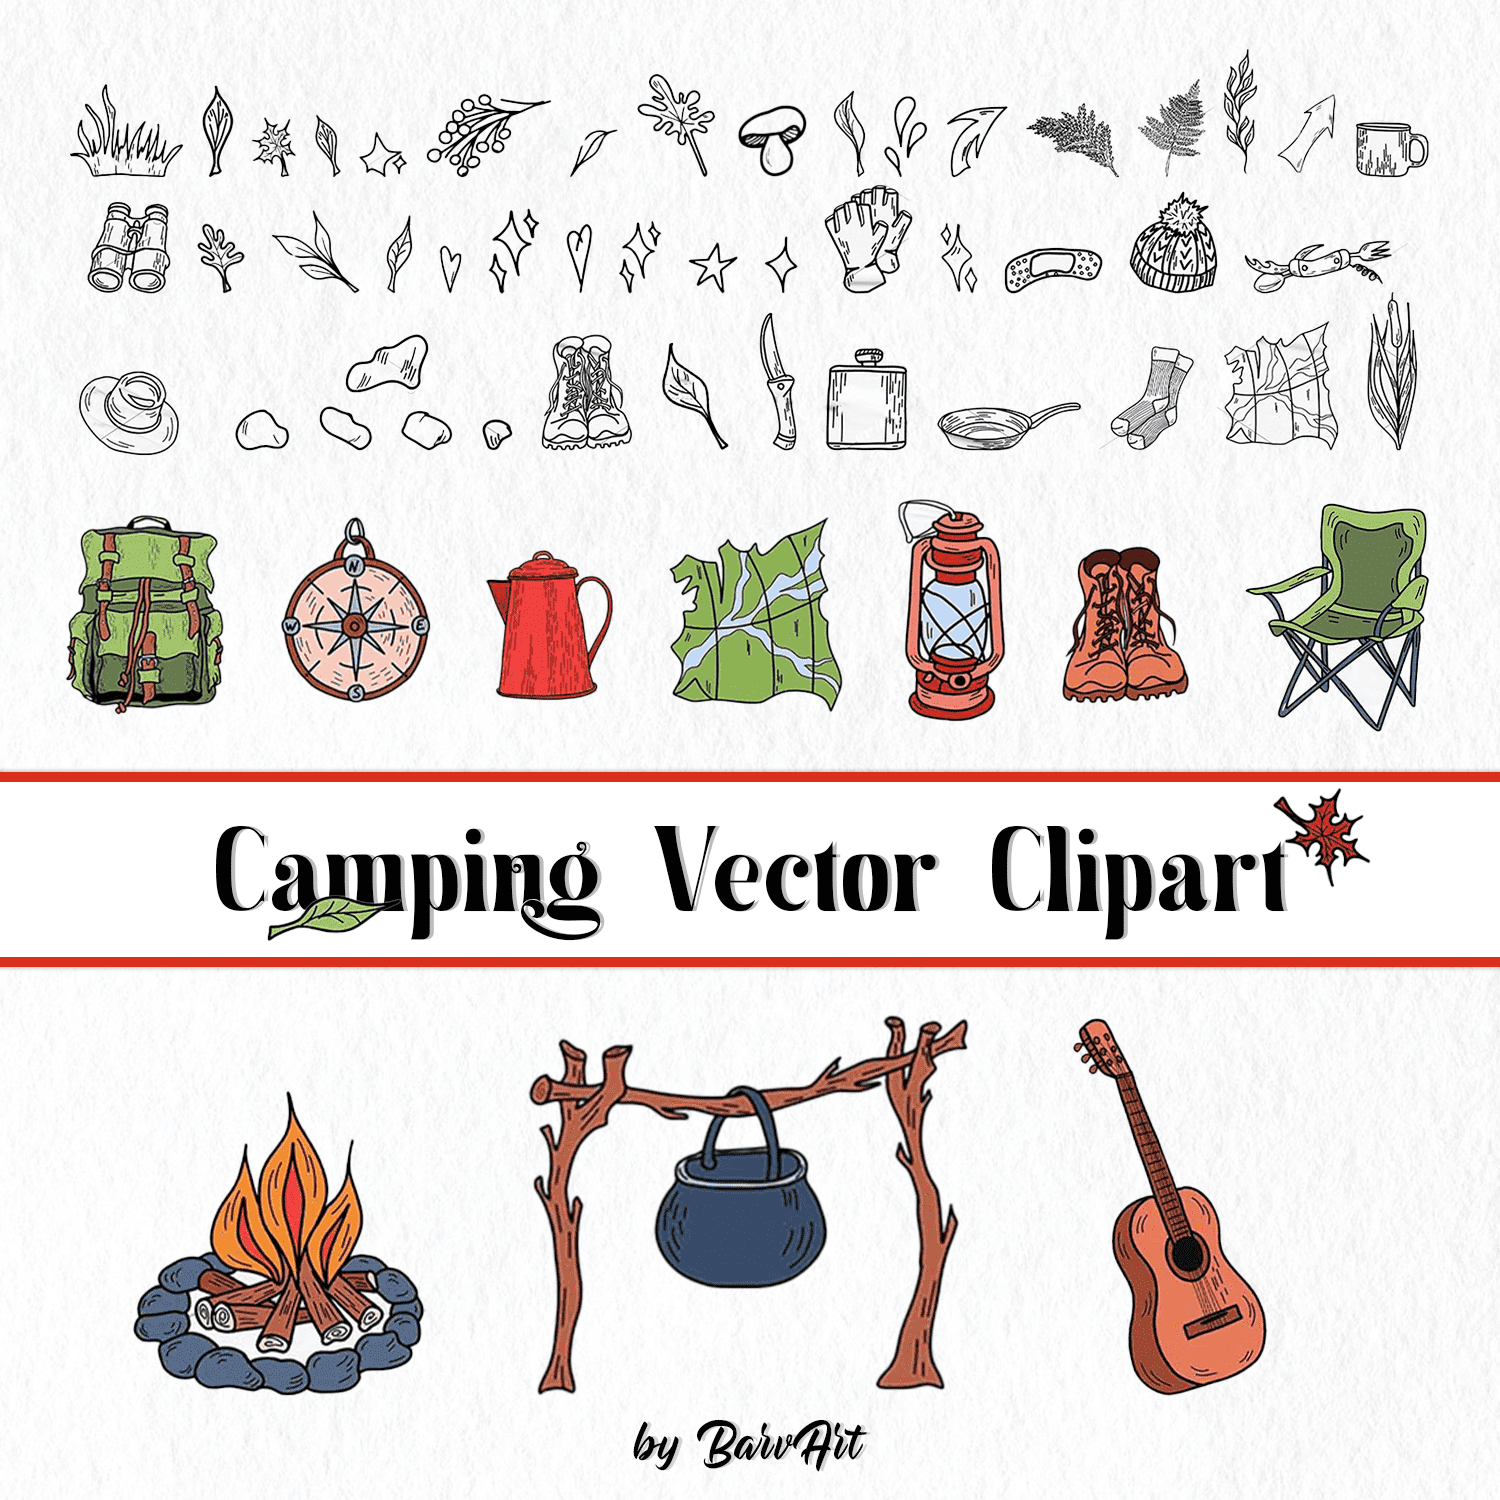 Camping Vector Clipart cover.